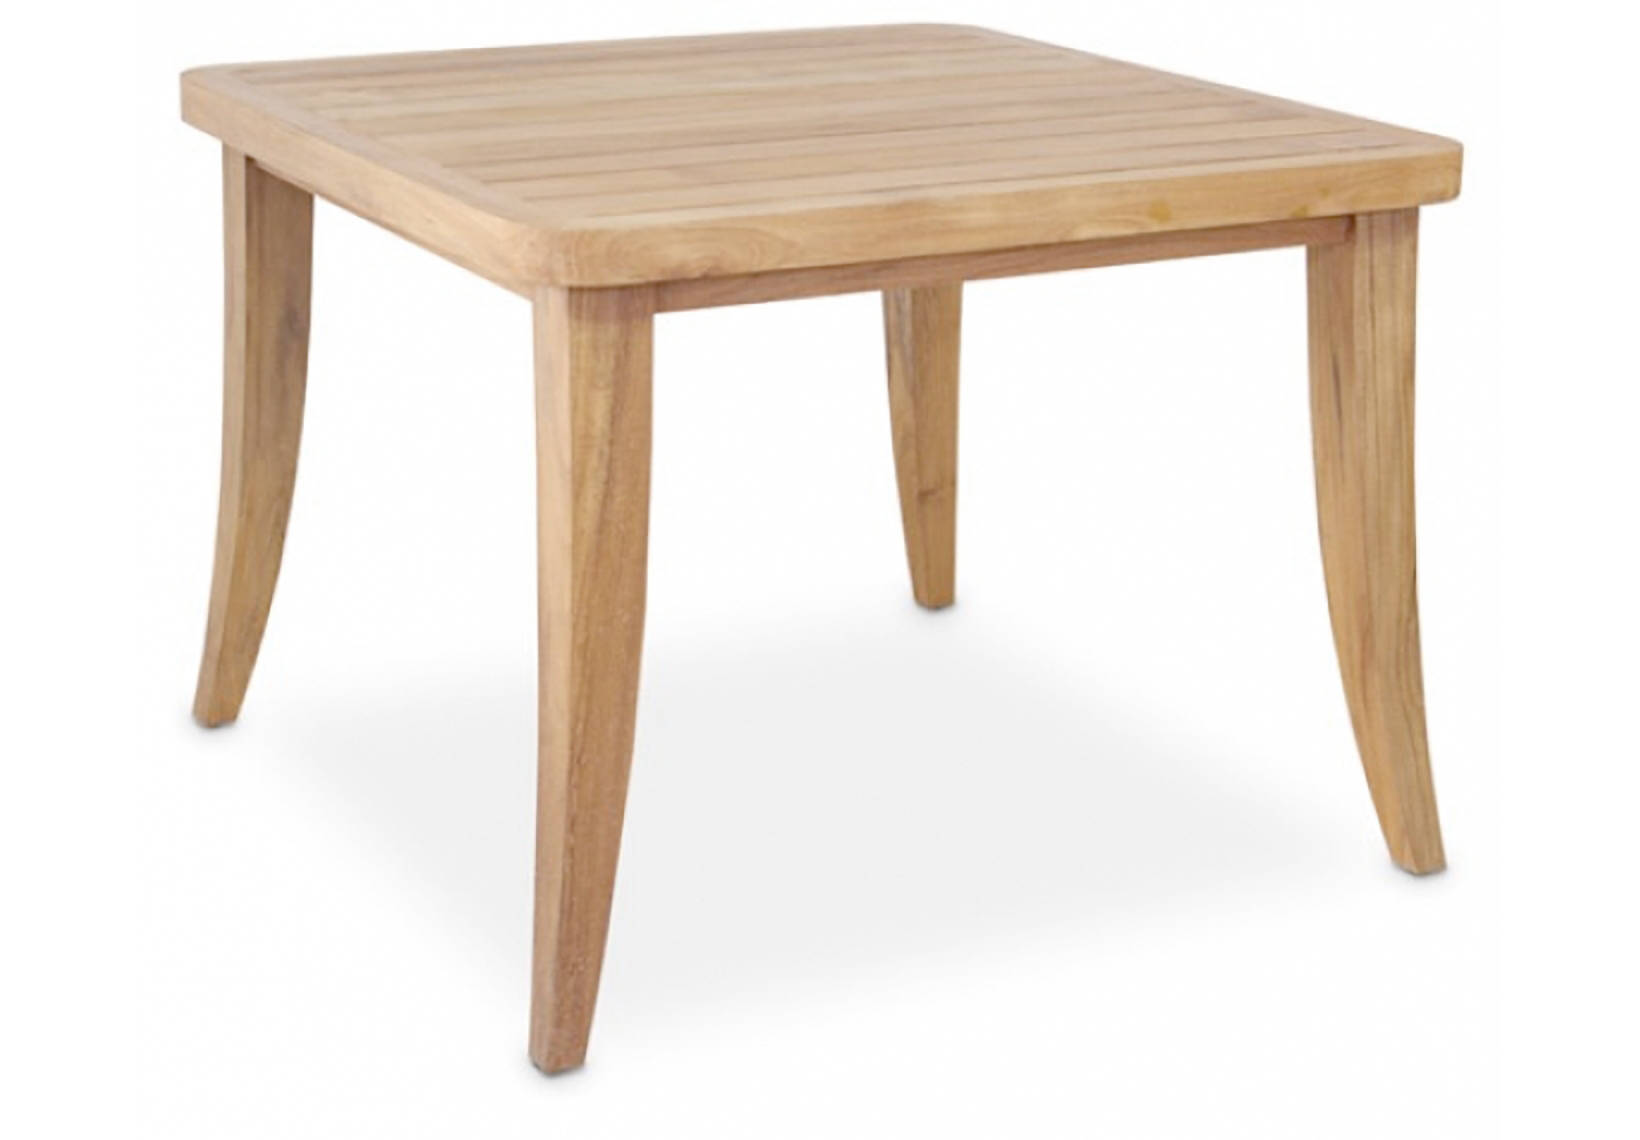 Spavision | Sophie Square Dining Table